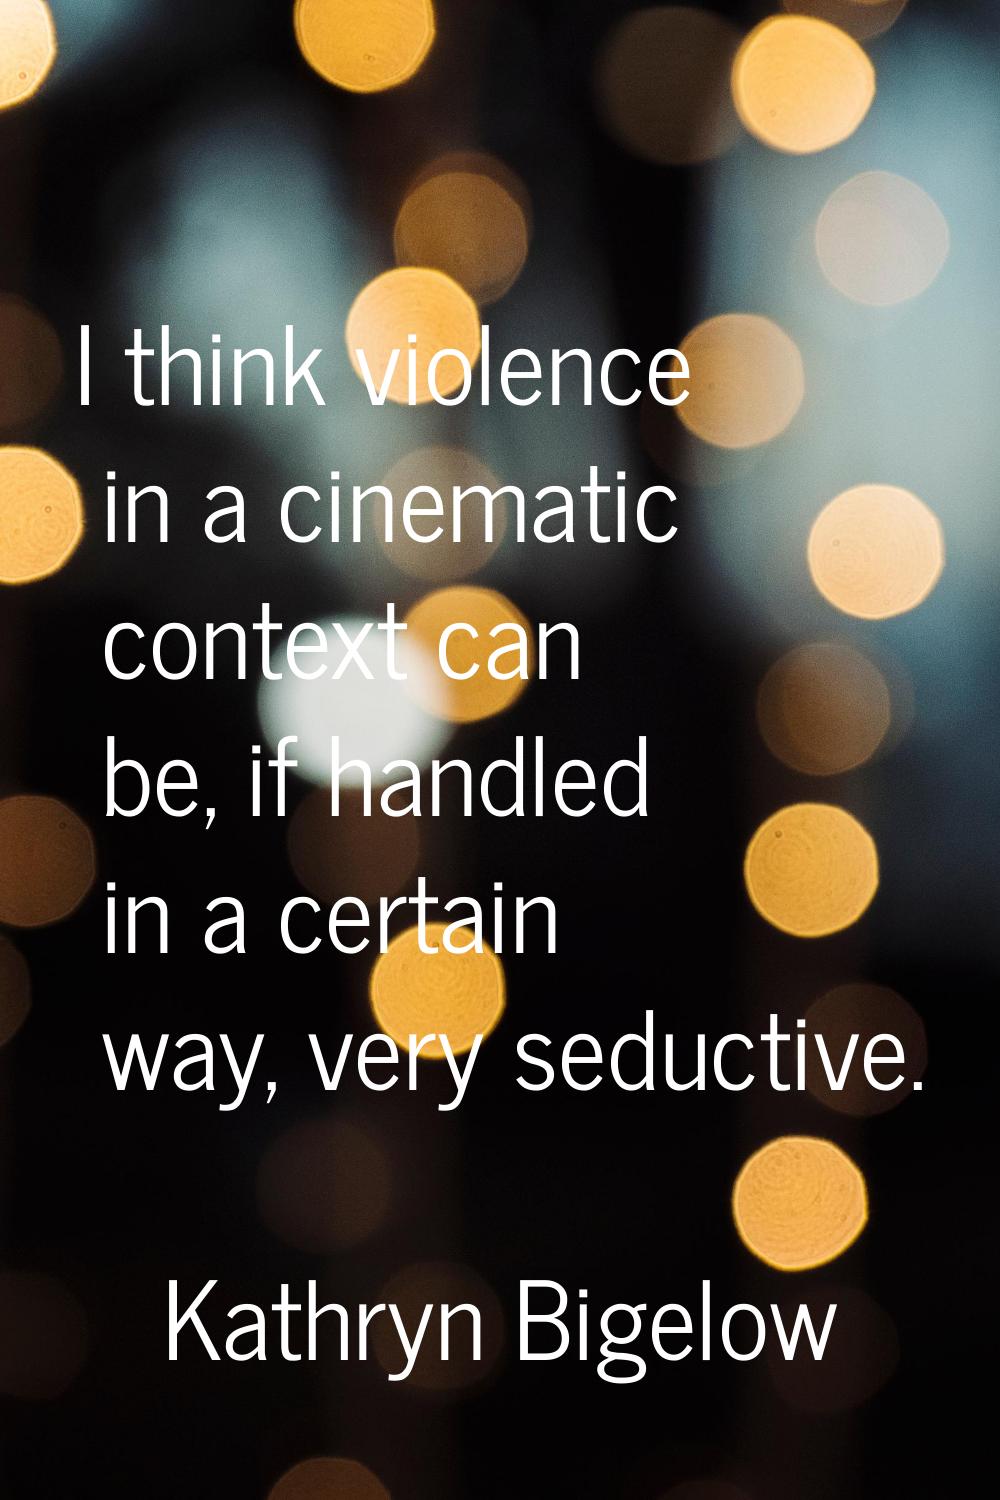 I think violence in a cinematic context can be, if handled in a certain way, very seductive.